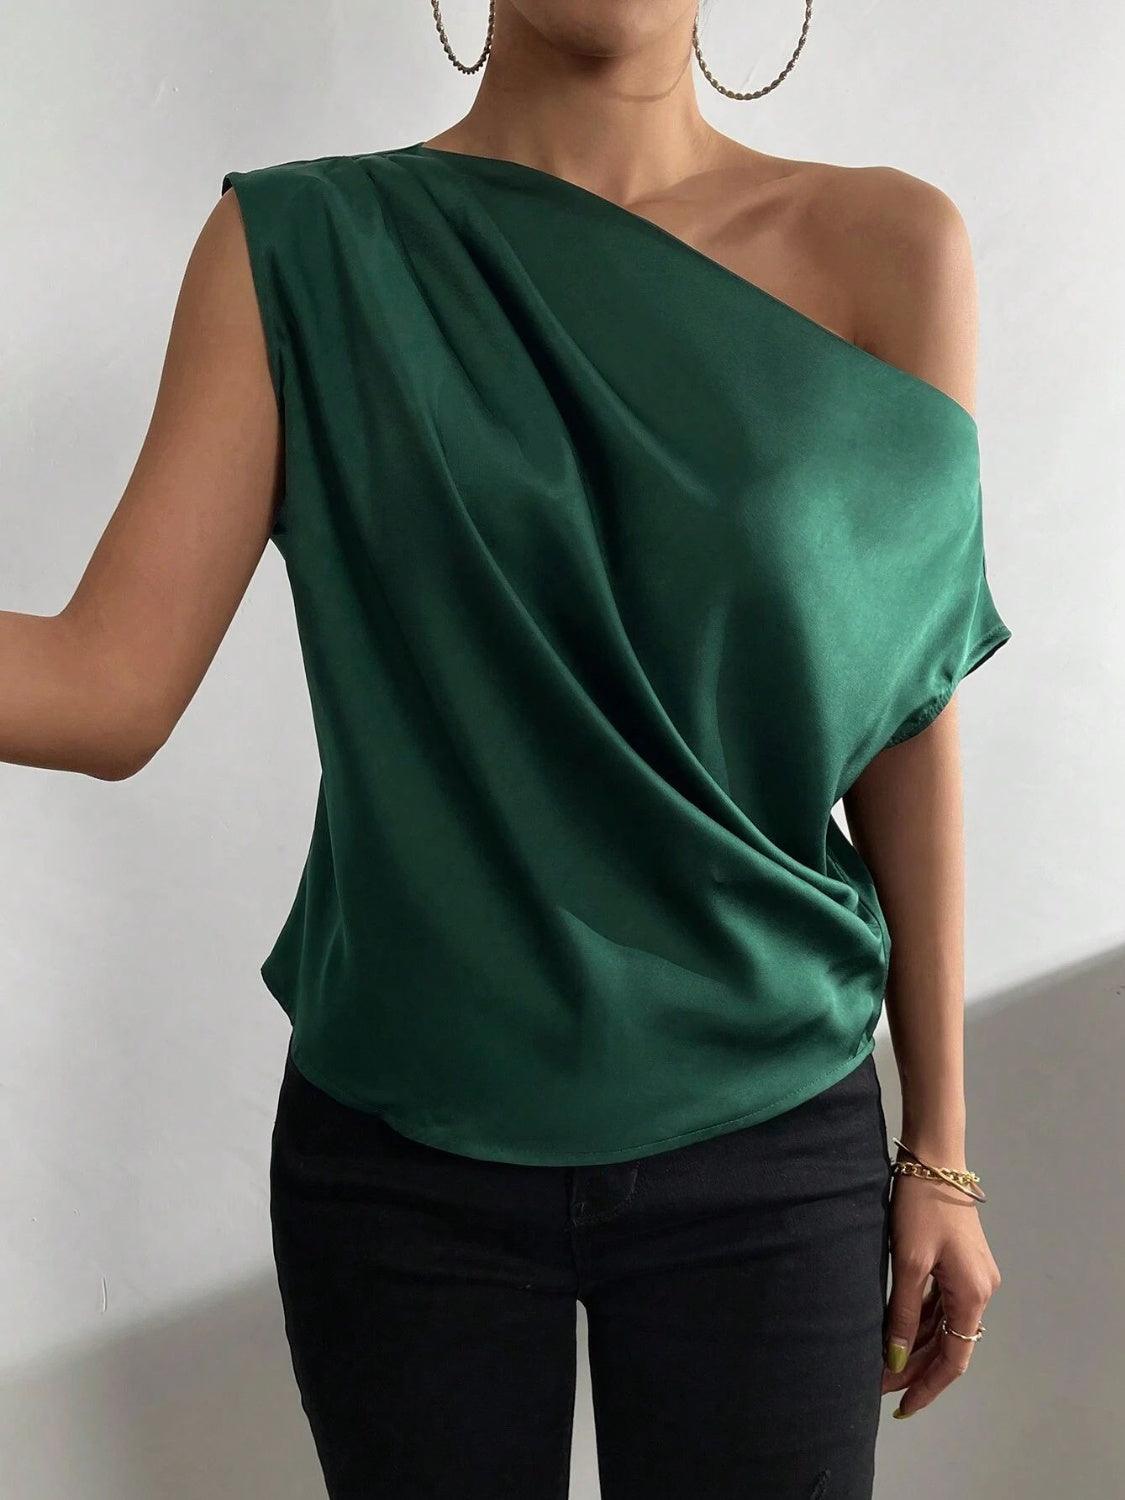 a woman in a green top is posing for a picture